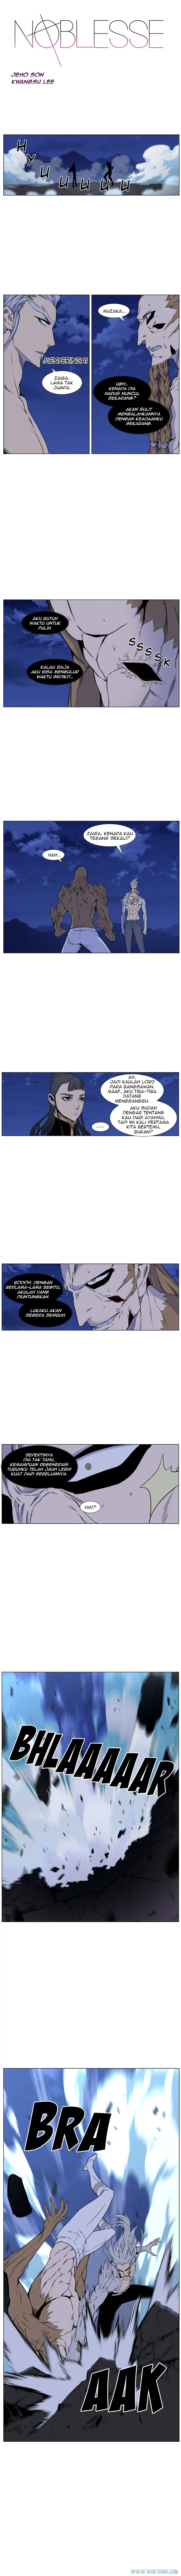 Noblesse Chapter 442 - 73